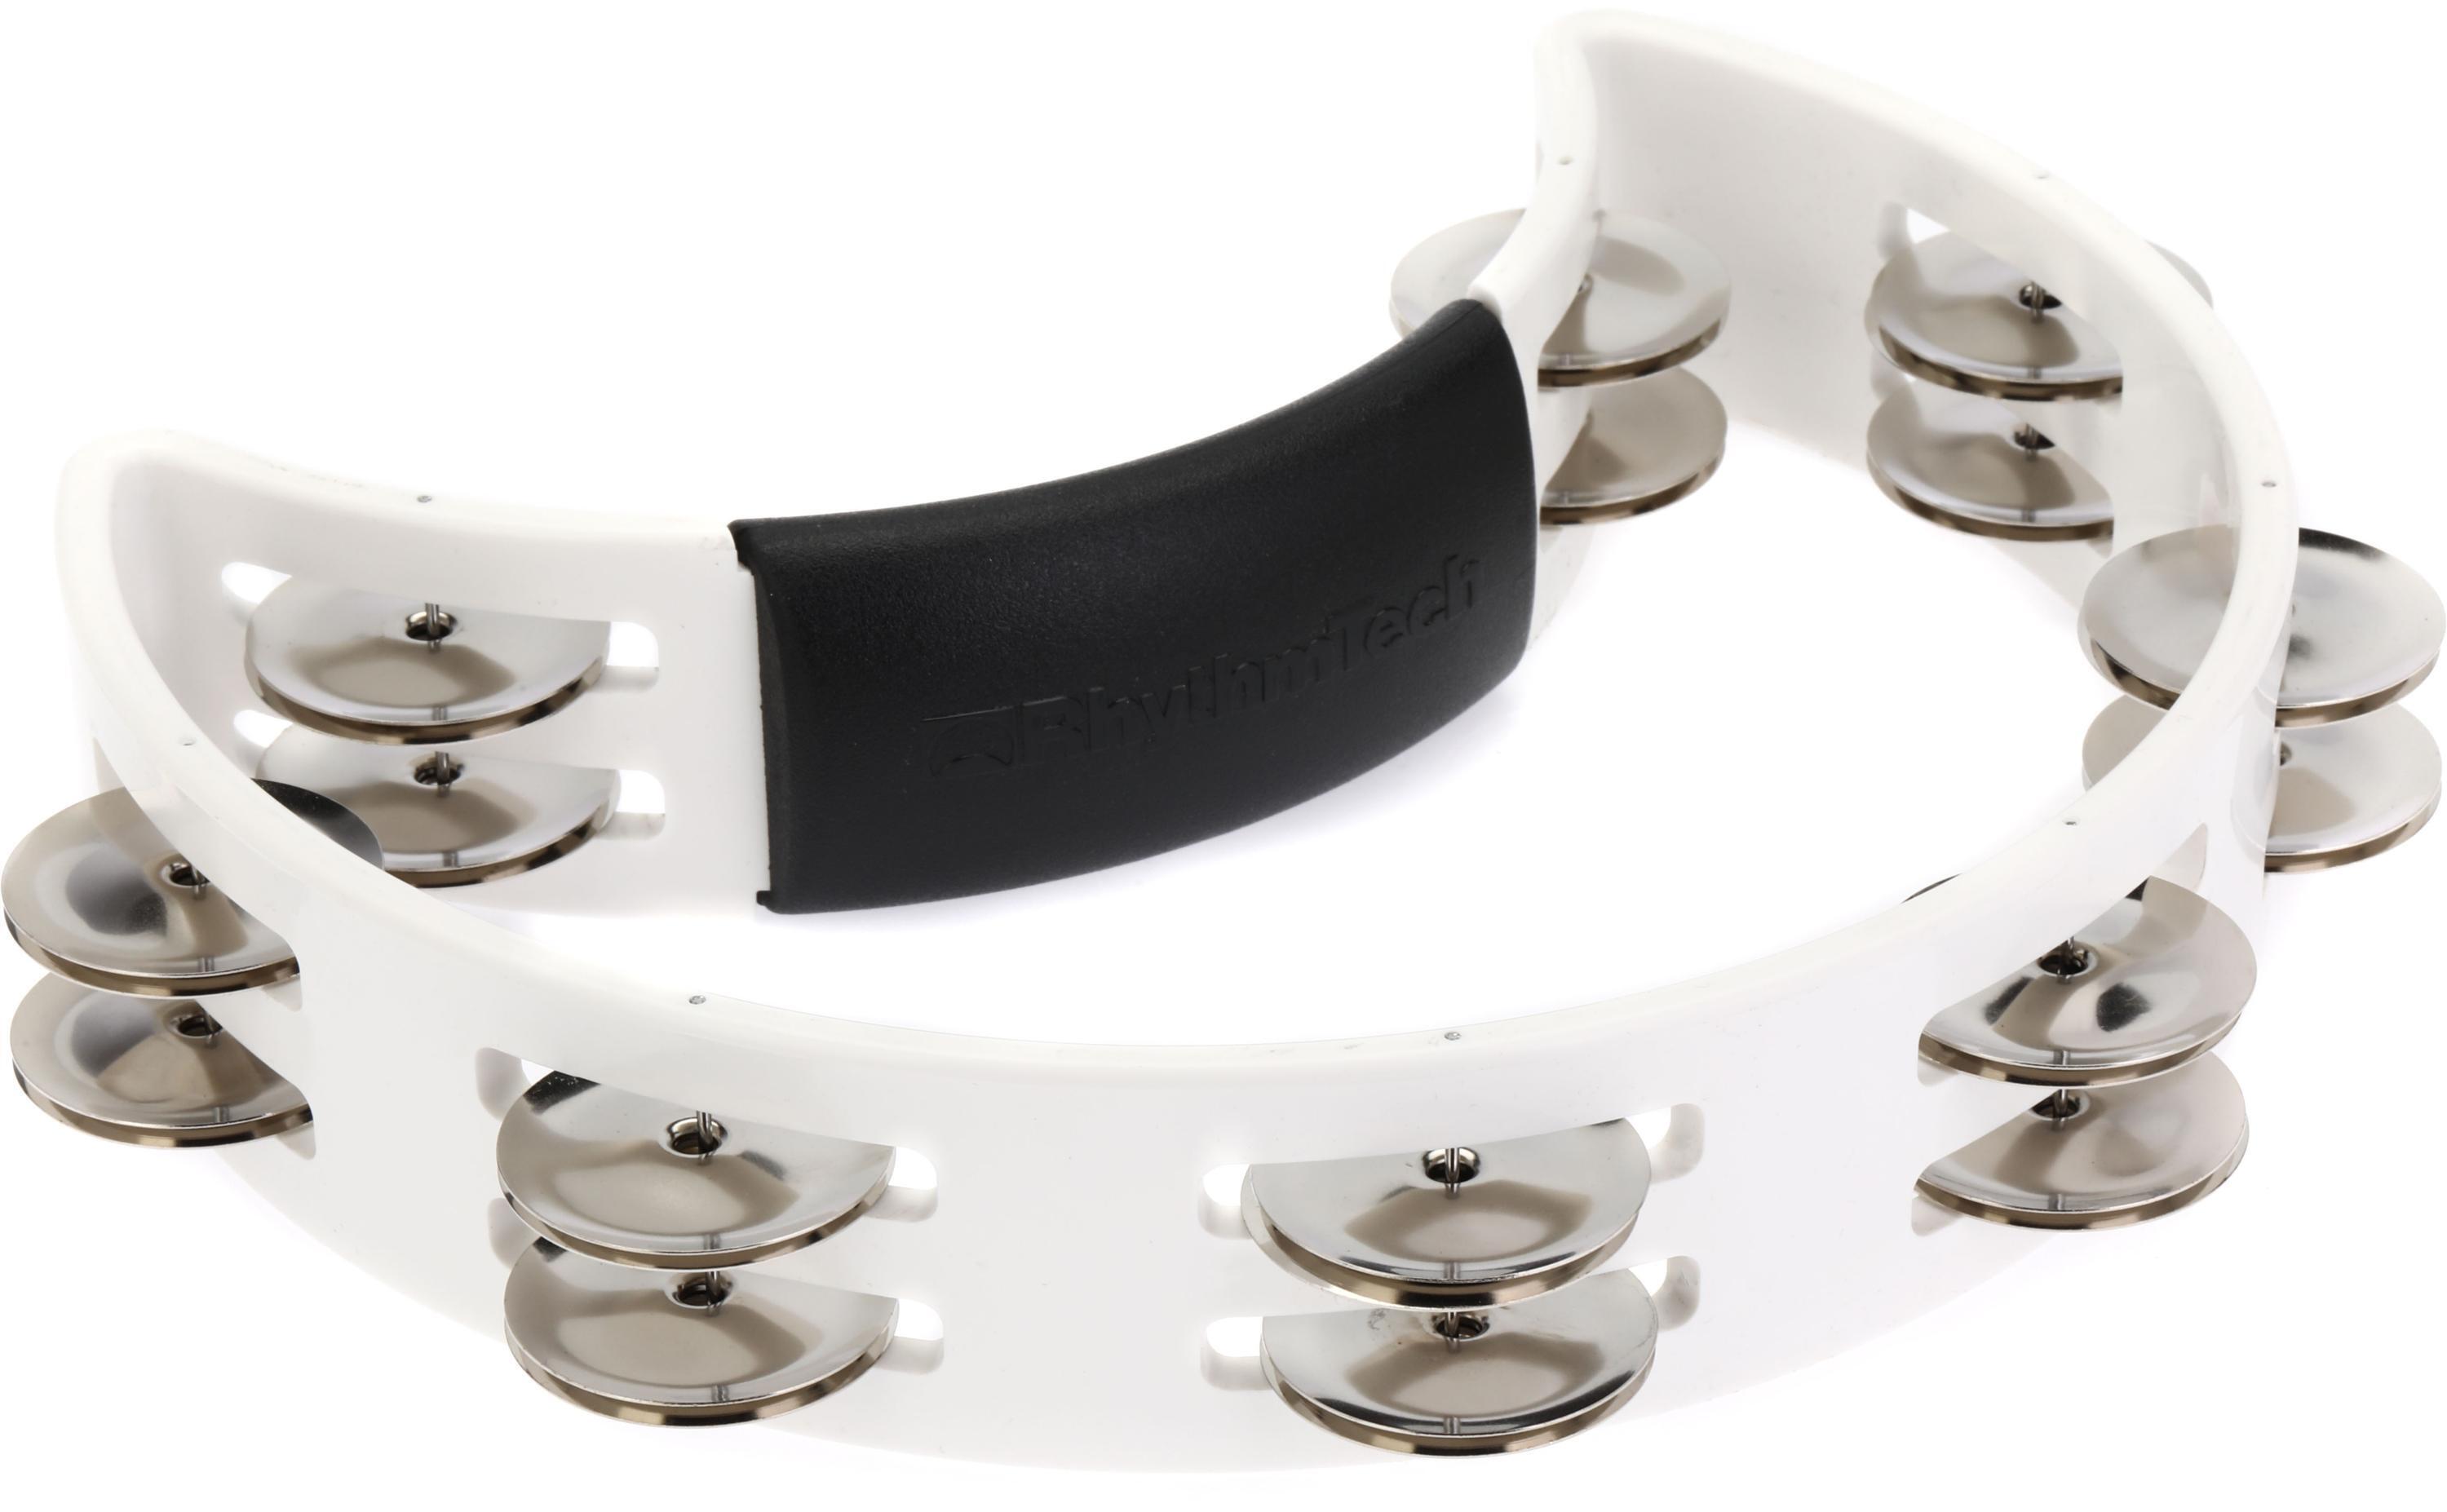 Rhythm Tech Tambourine - White with Nickel Jingles | Sweetwater